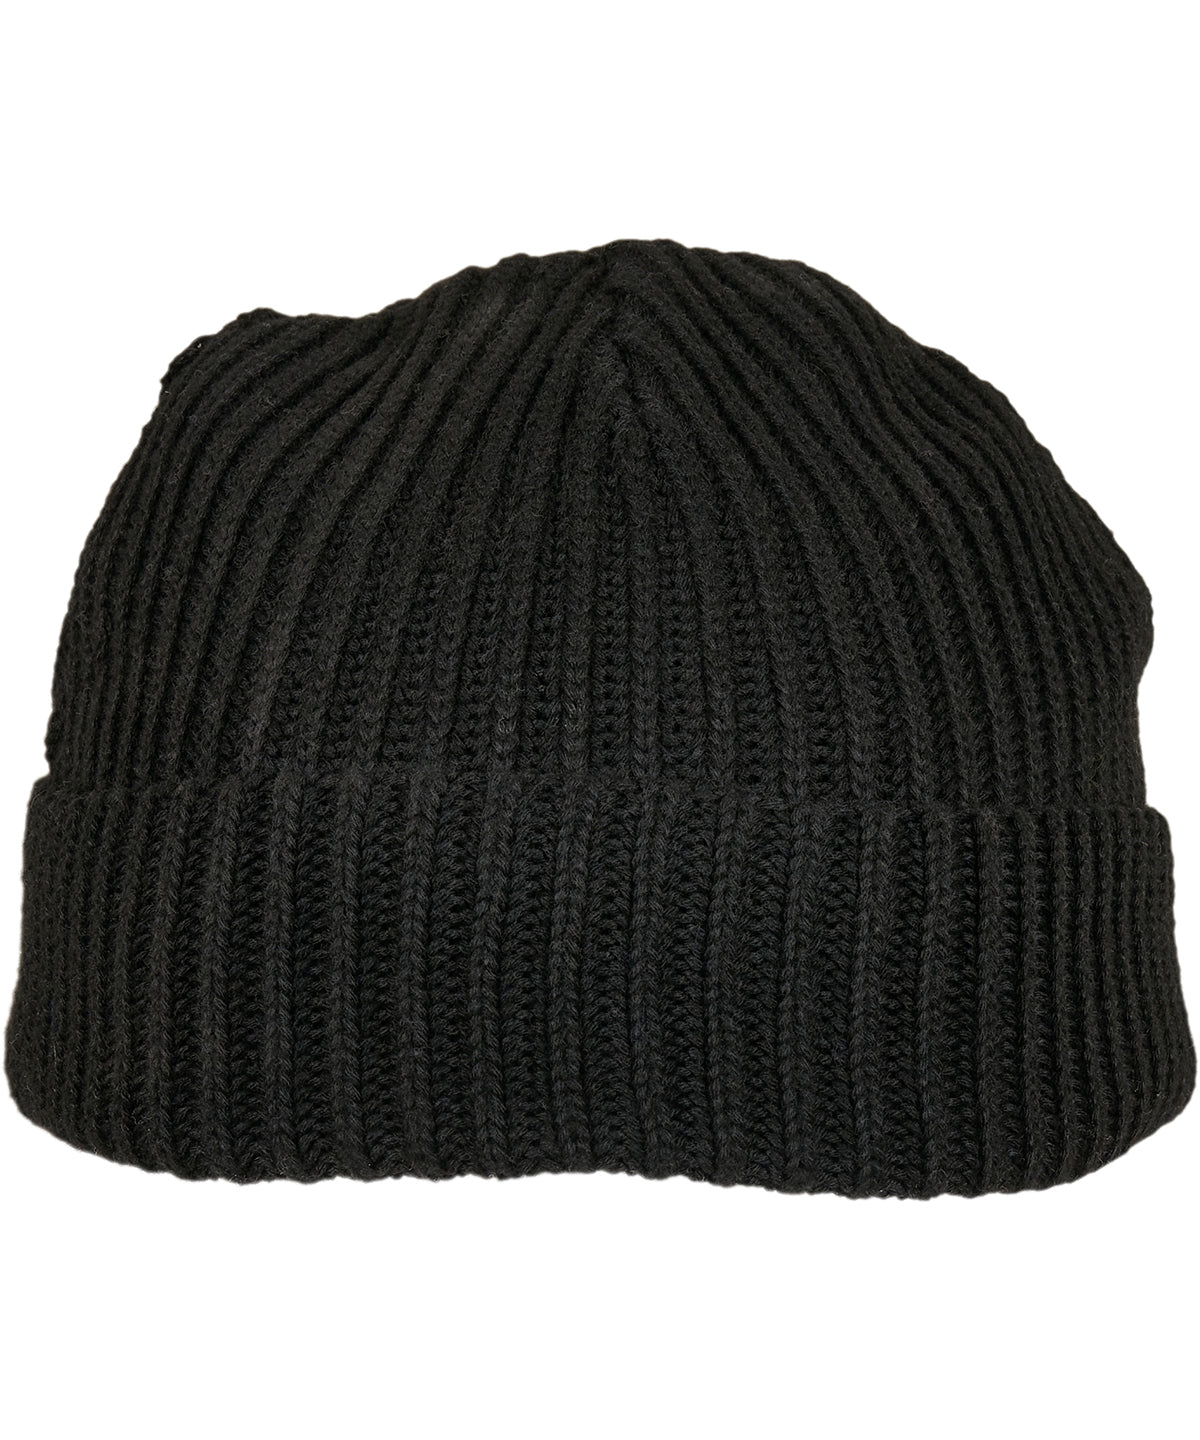 Personalised Hats - Black Build Your Brand Recycled yarn fisherman beanie